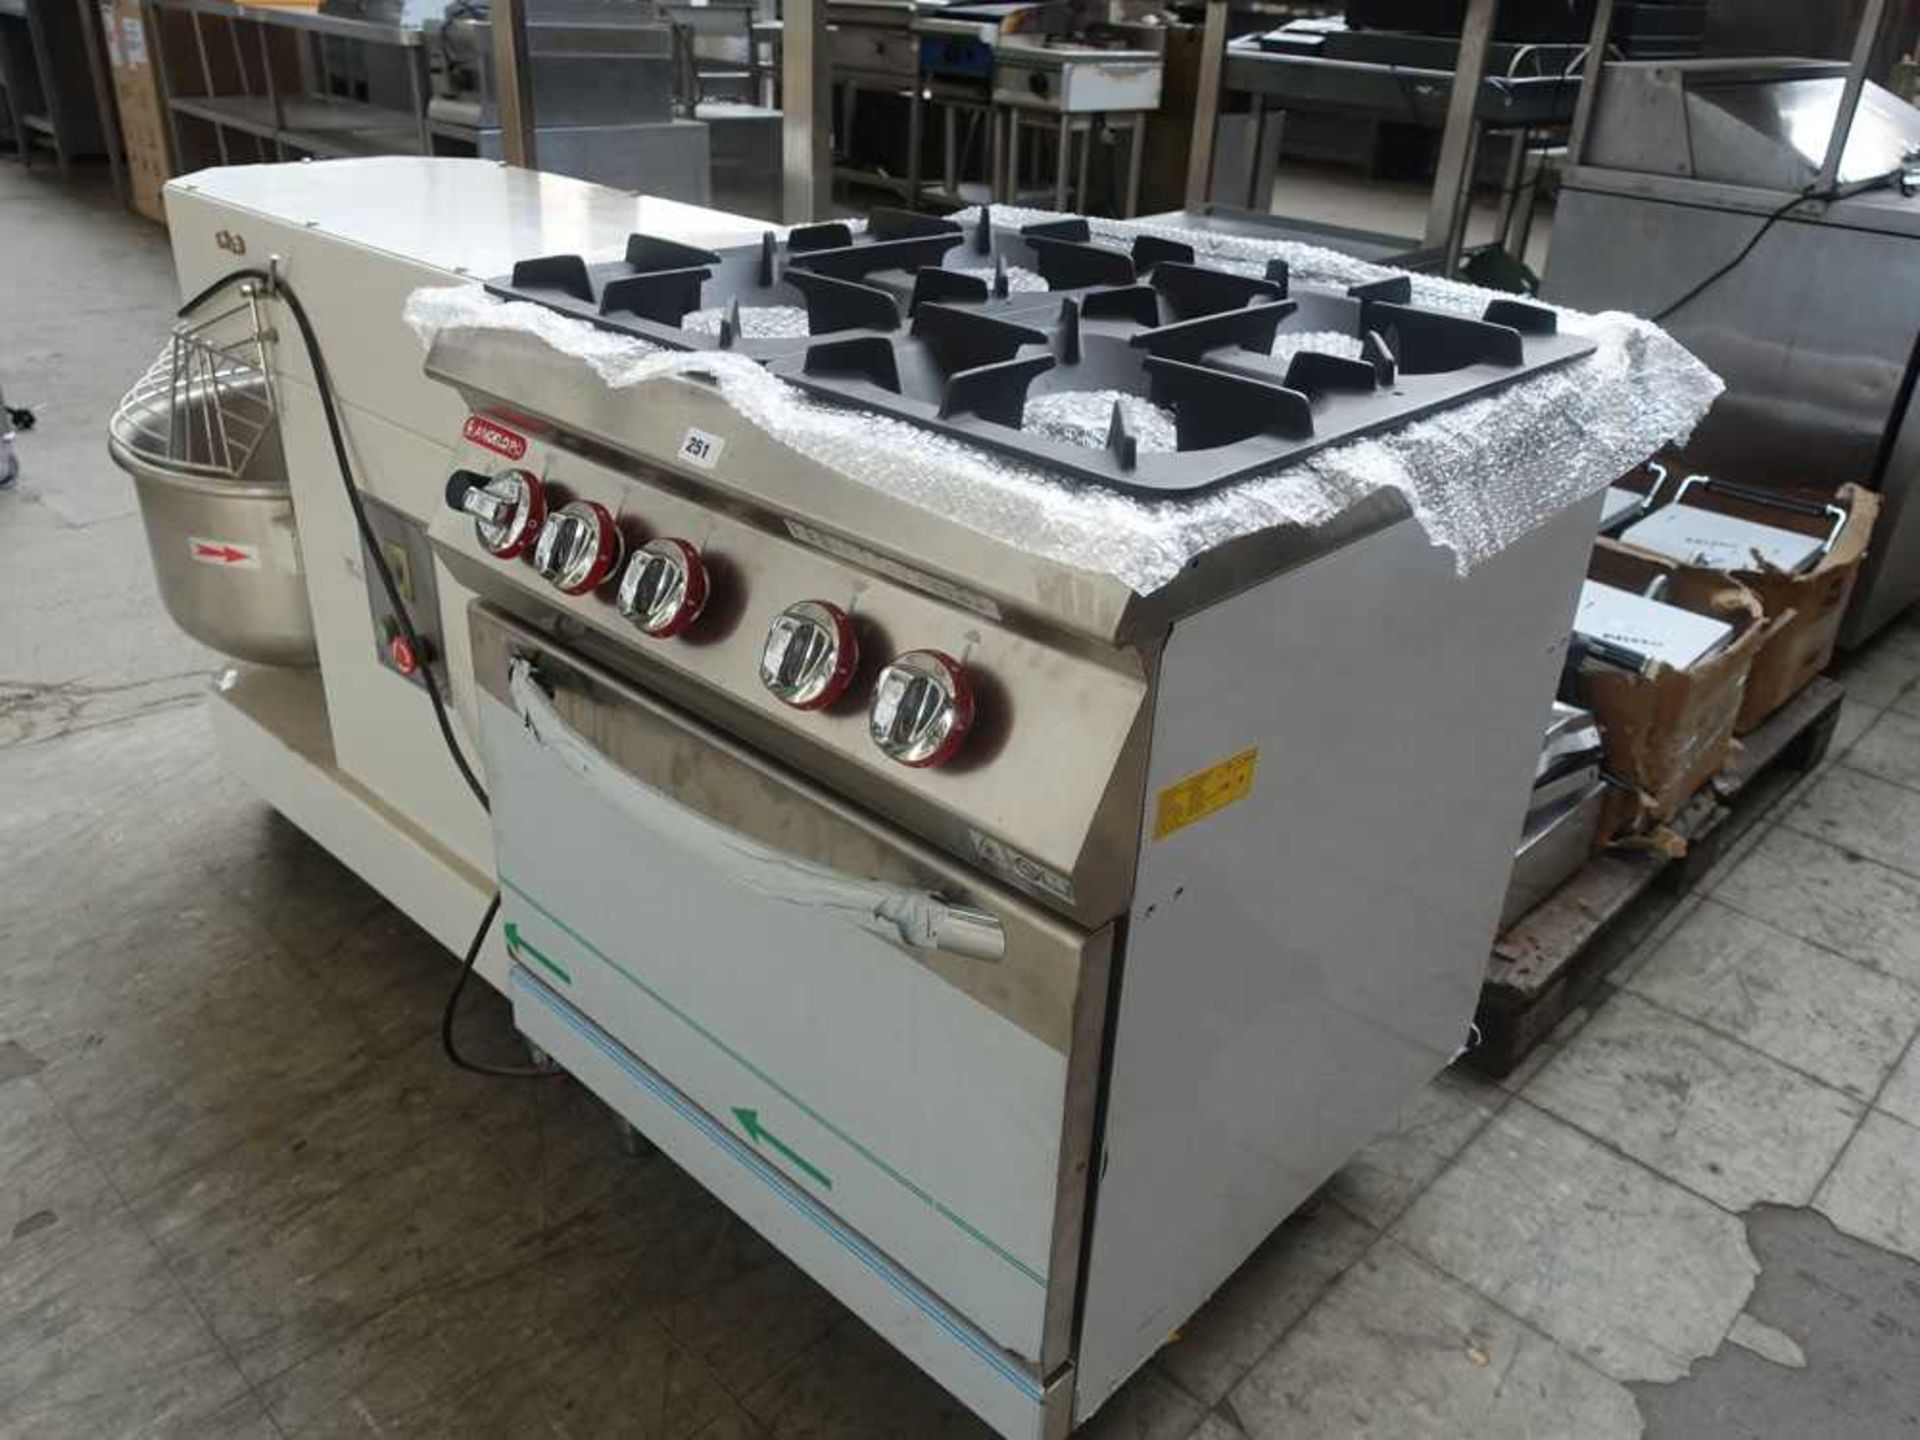 70cm gas Angelo Po 4 burner cooker with large single oven under - Image 2 of 2